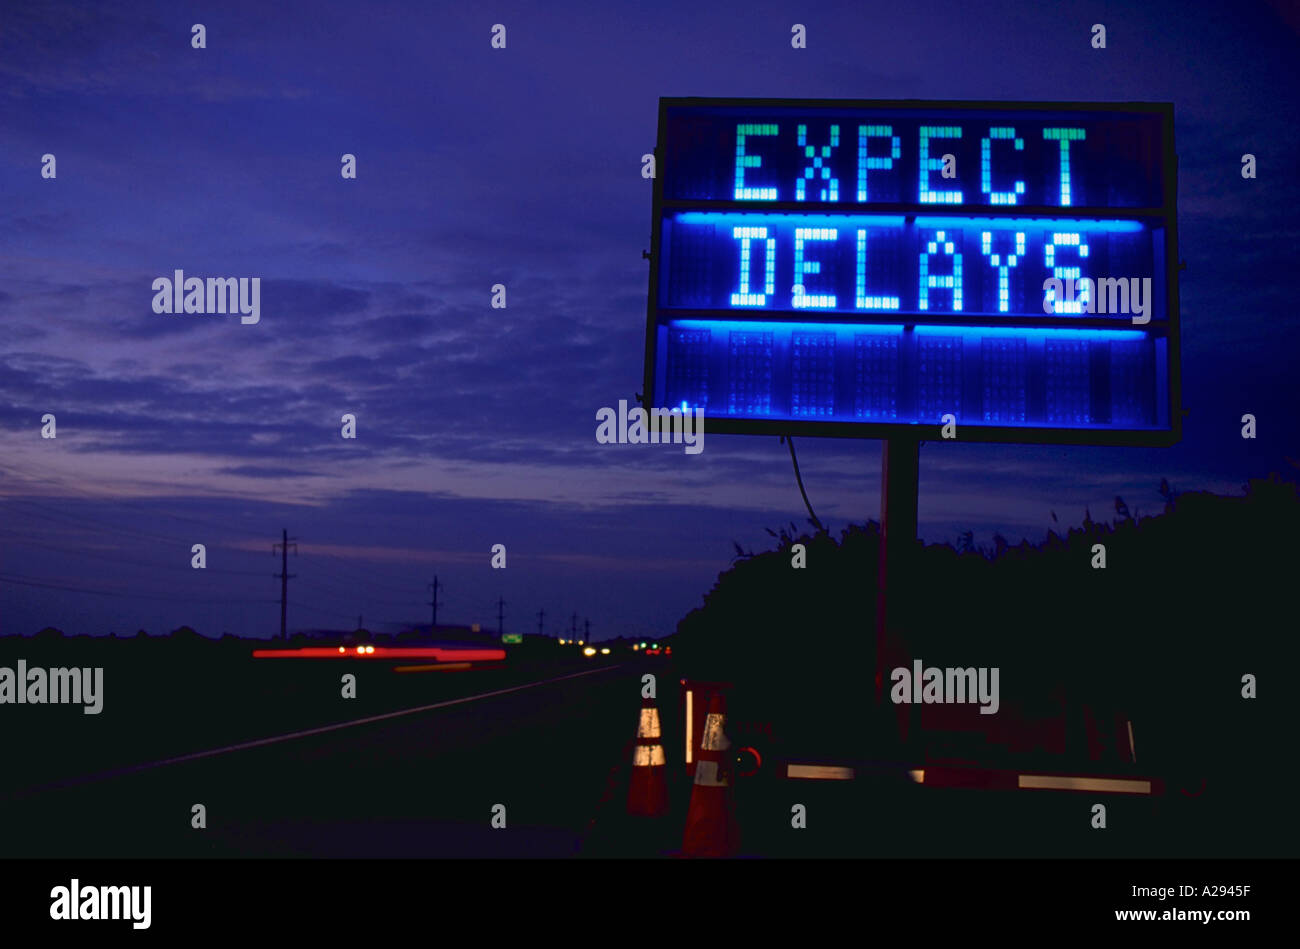 Expect Delays mobile programmable traffic sign at twilight Concept Real Life Stock Photo